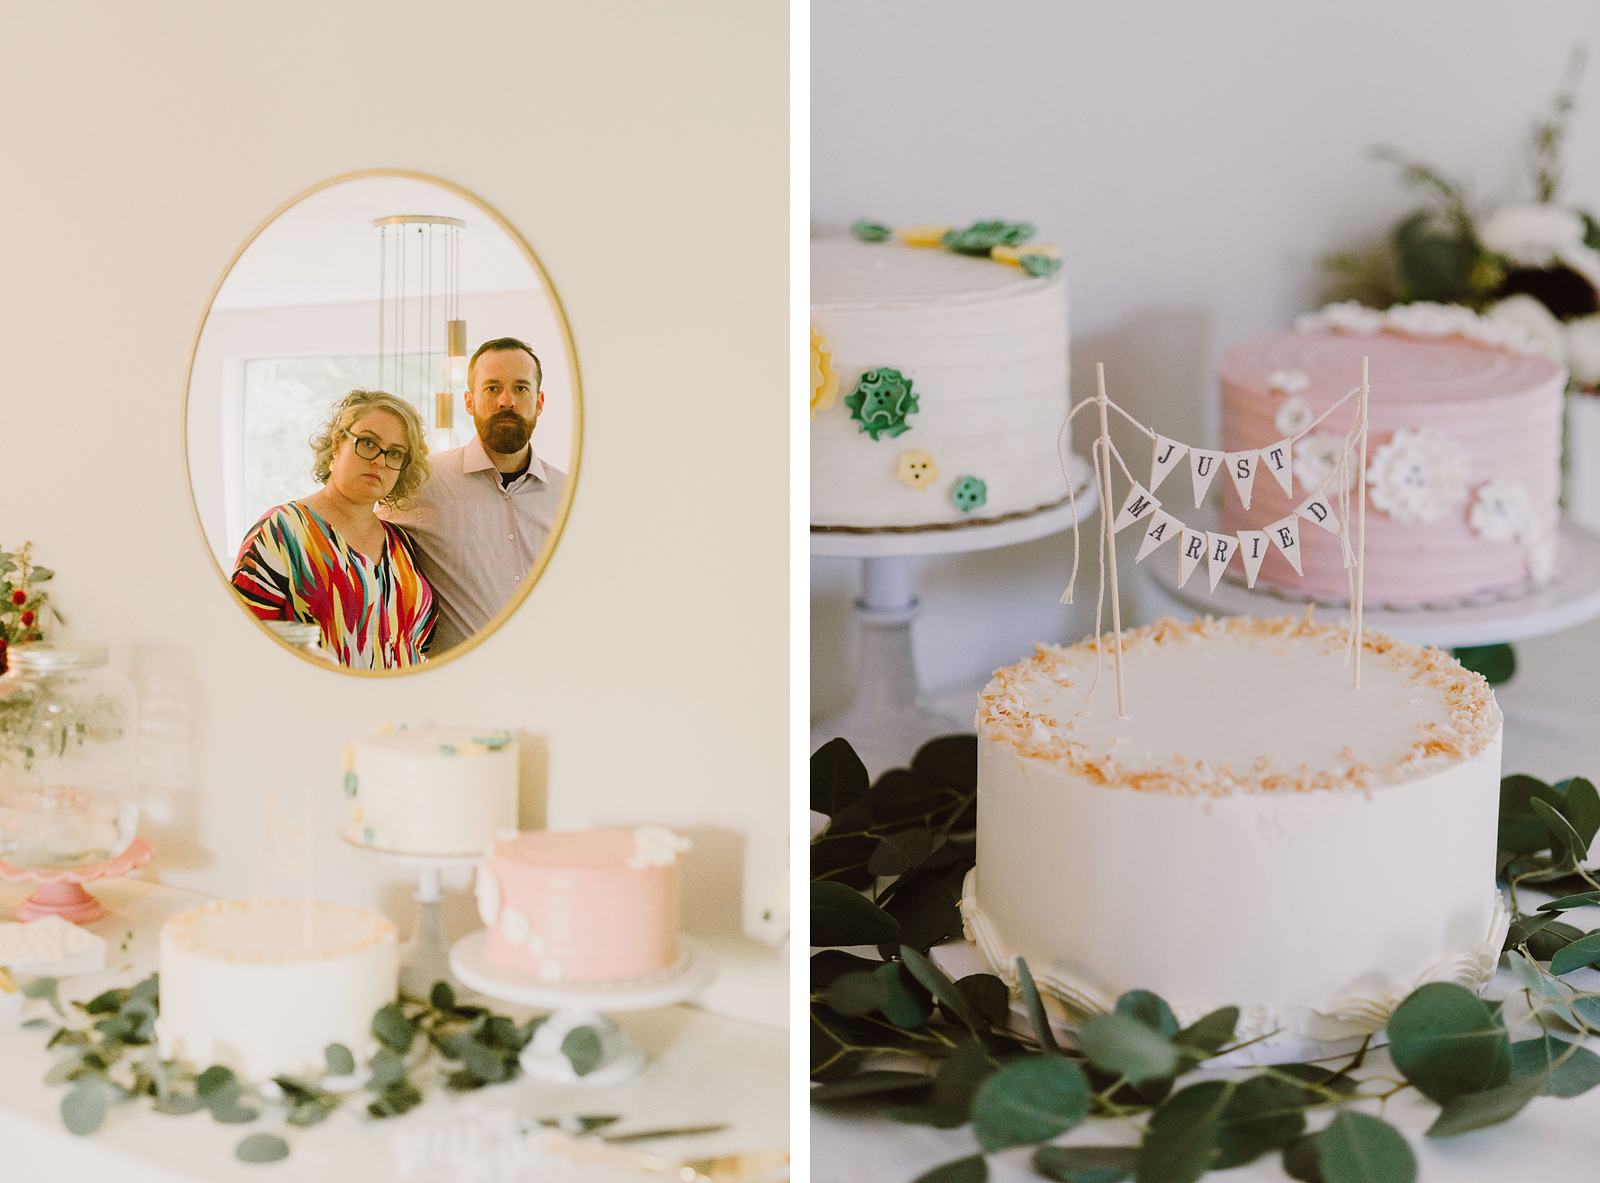 Bride and Groom mean mugging in the mirror next to their wedding cakes - Oaks Pioneer Church Wedding